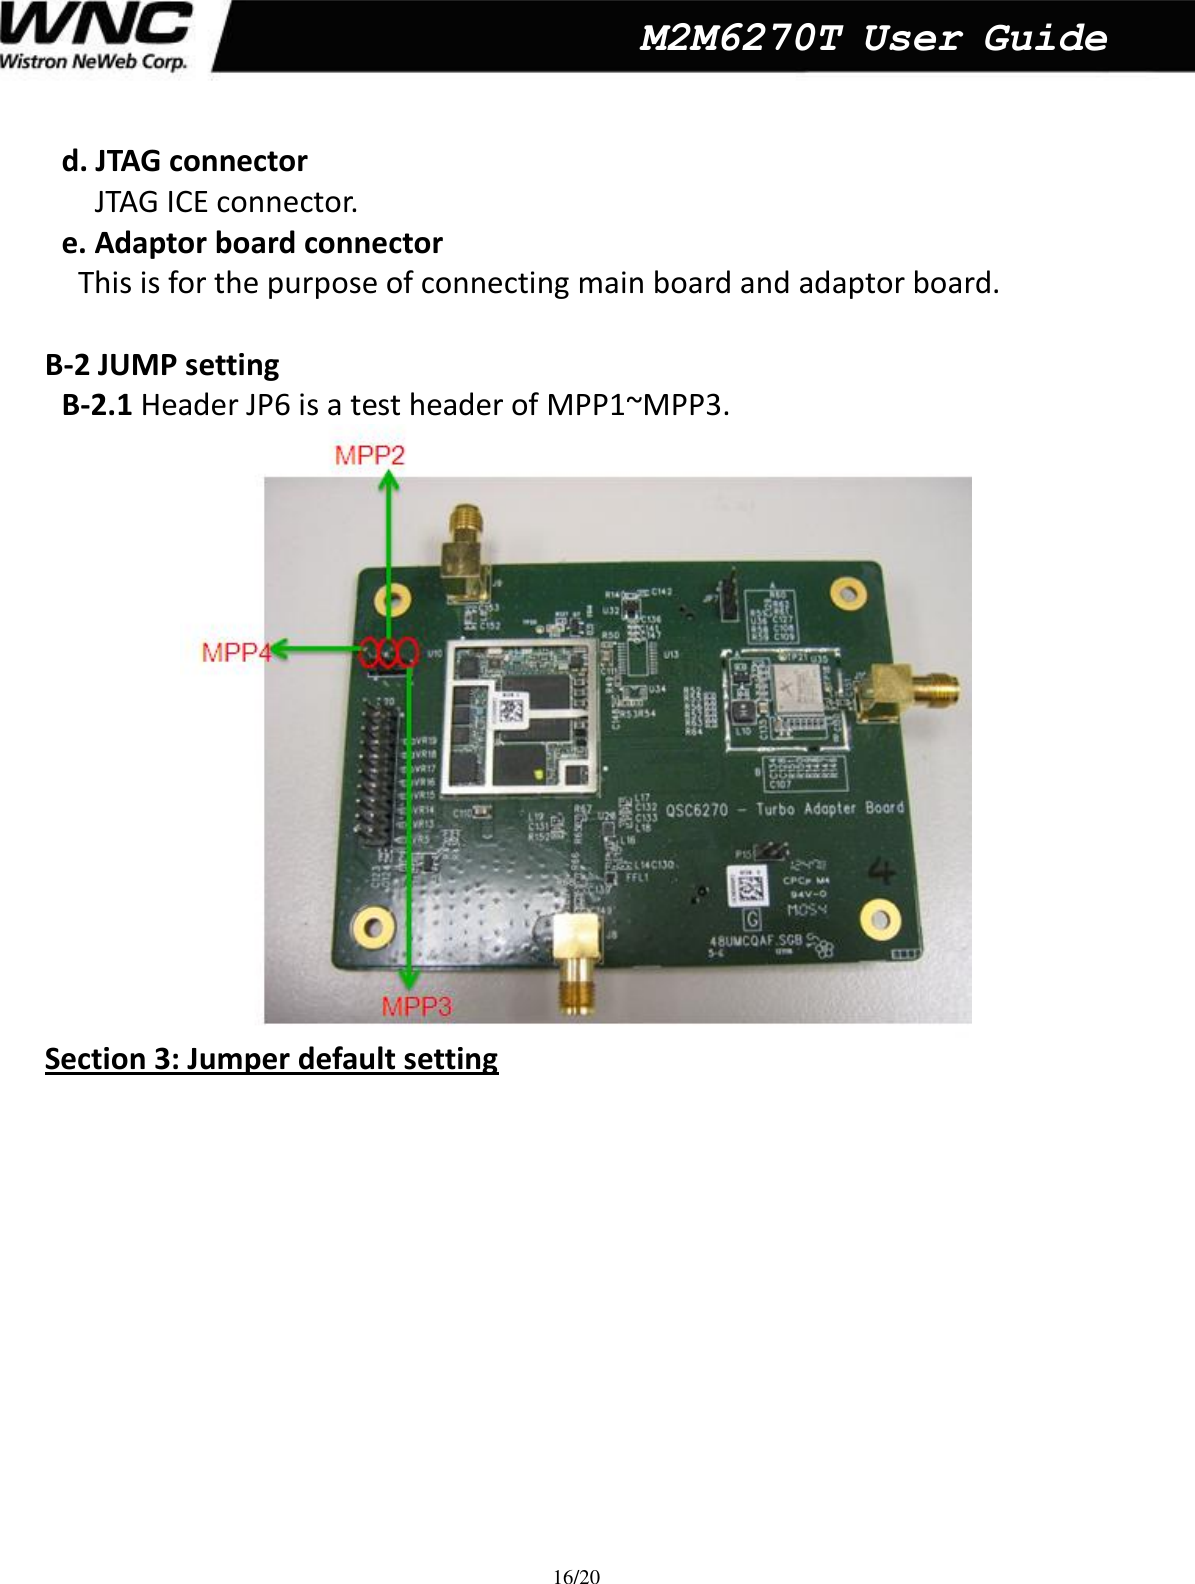  16/20  M2M6270T User Guide d. JTAG connector JTAG ICE connector. e. Adaptor board connector This is for the purpose of connecting main board and adaptor board.    B-2 JUMP setting B-2.1 Header JP6 is a test header of MPP1~MPP3.    Section 3: Jumper default setting 